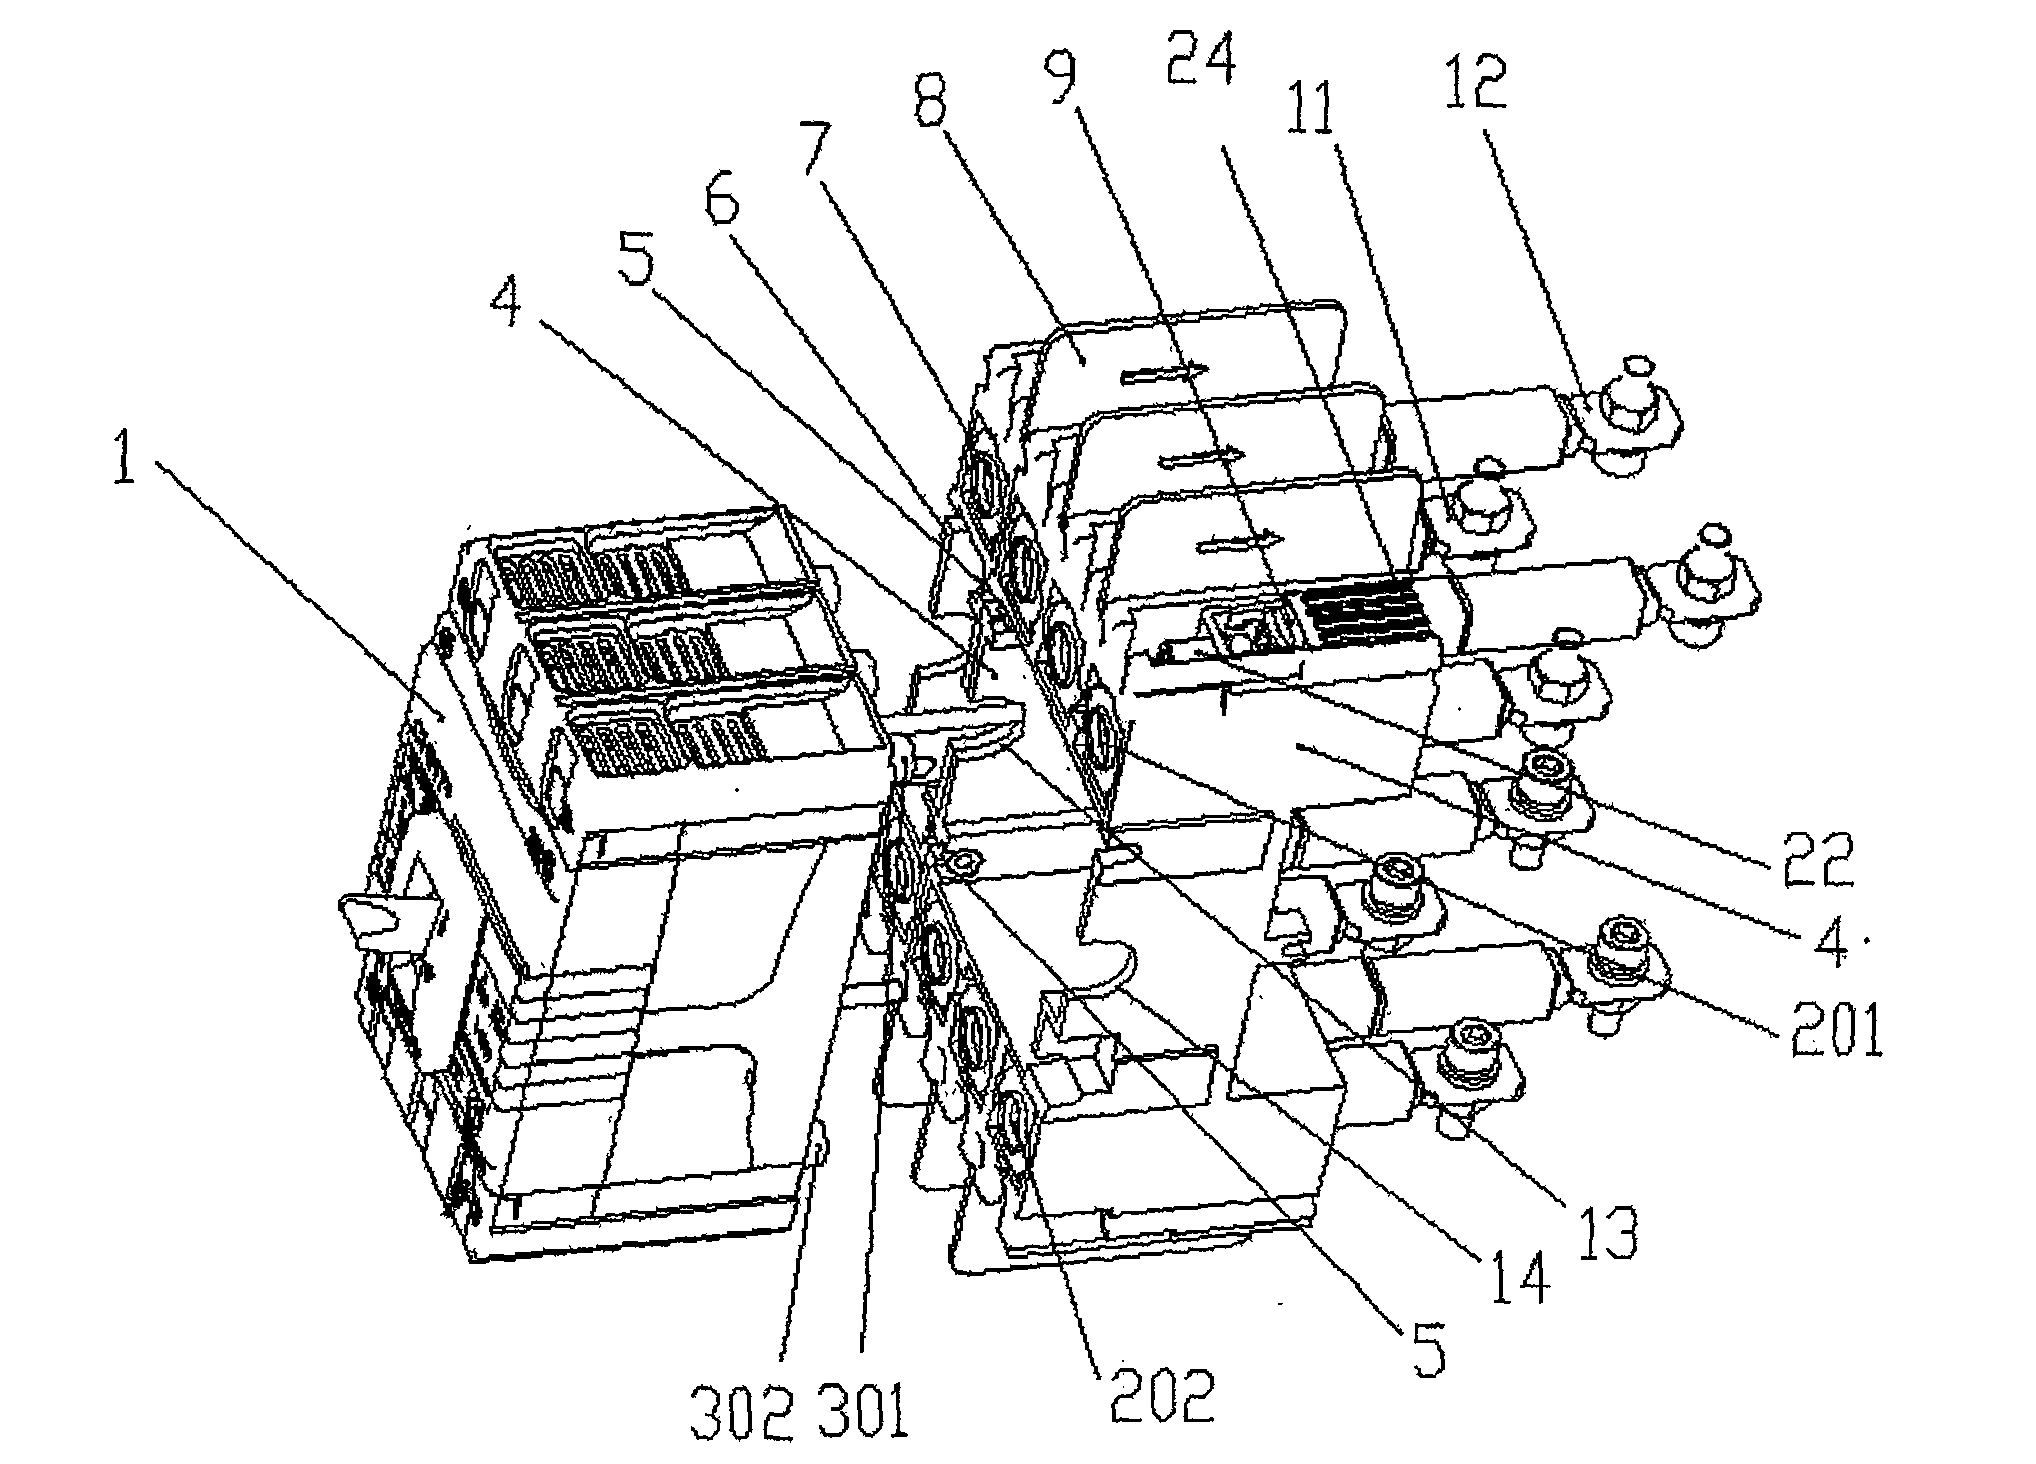 Plug-in base of plastic shell type electric appliance having multiple wiring functions